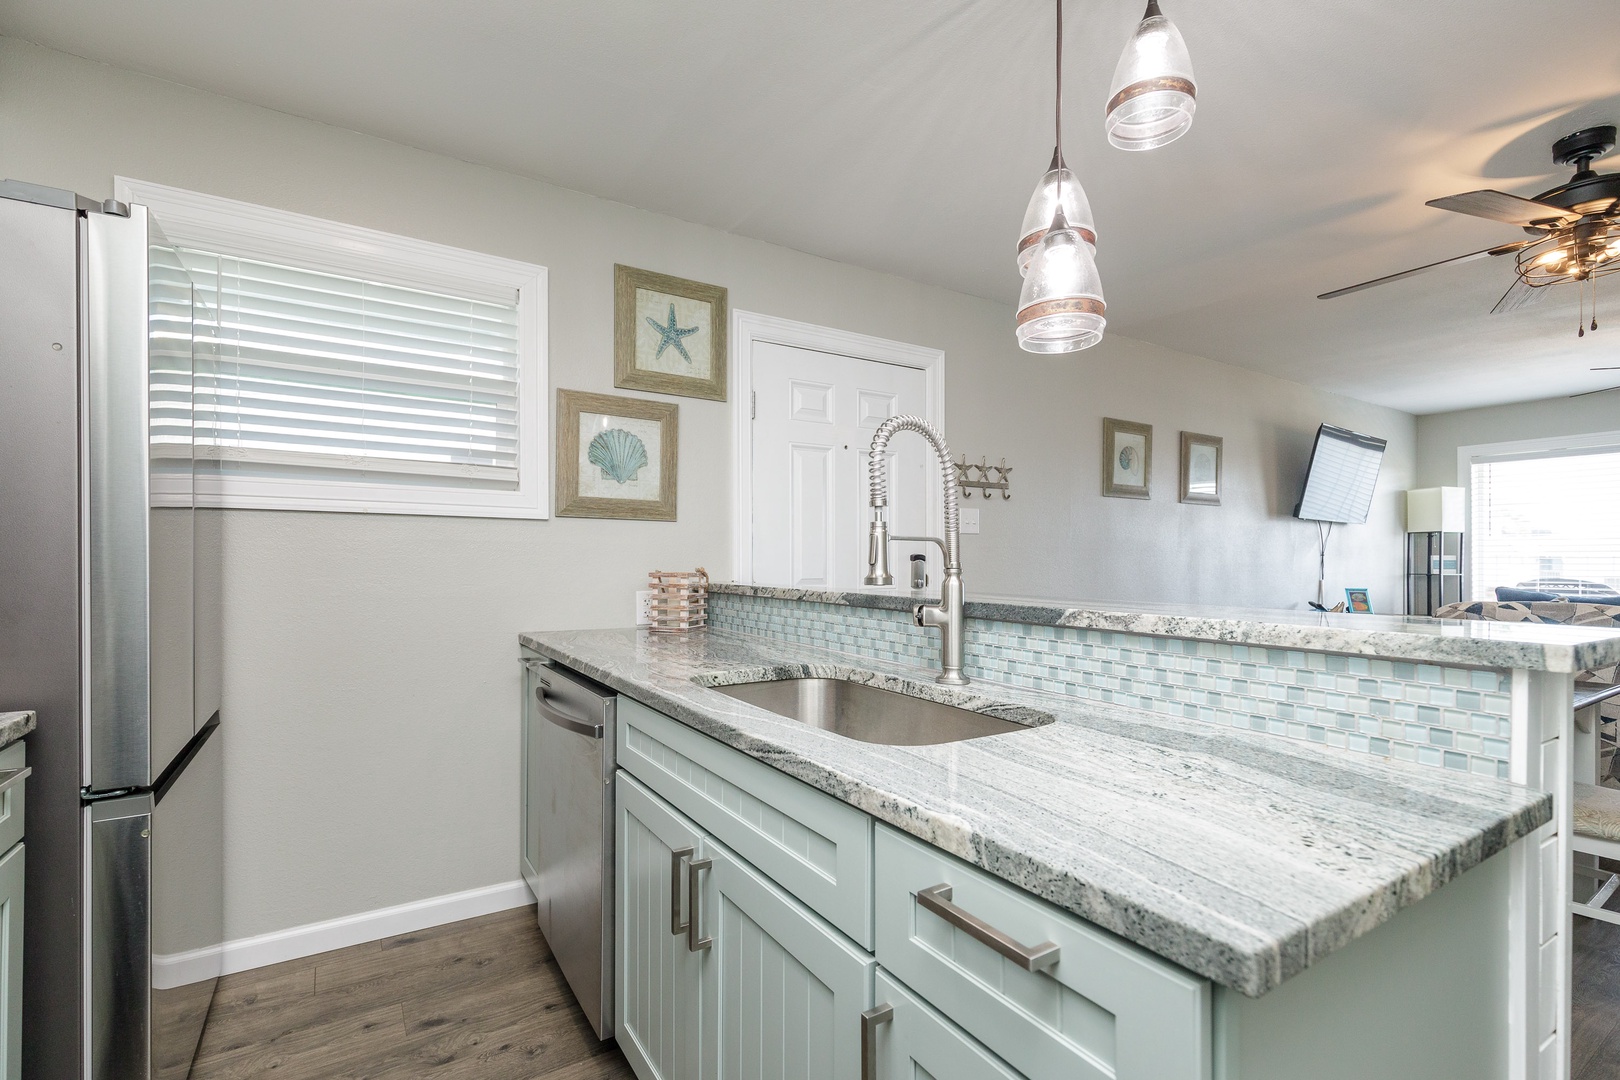 The updated, beachy kitchen offers ample space & all the comforts of home